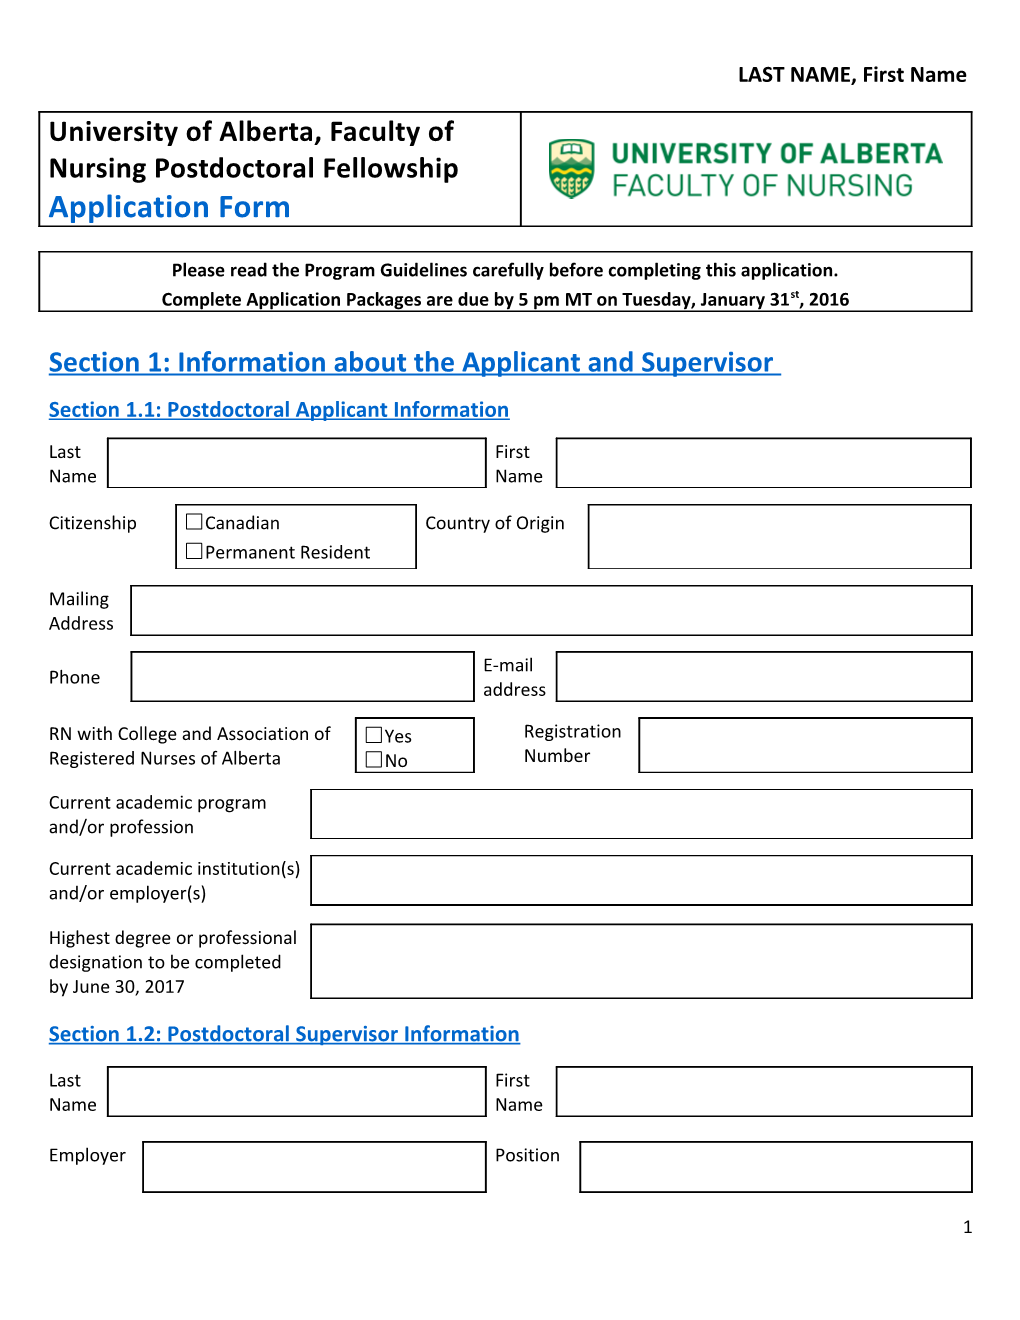 Section 1: Information About the Applicant and Supervisor